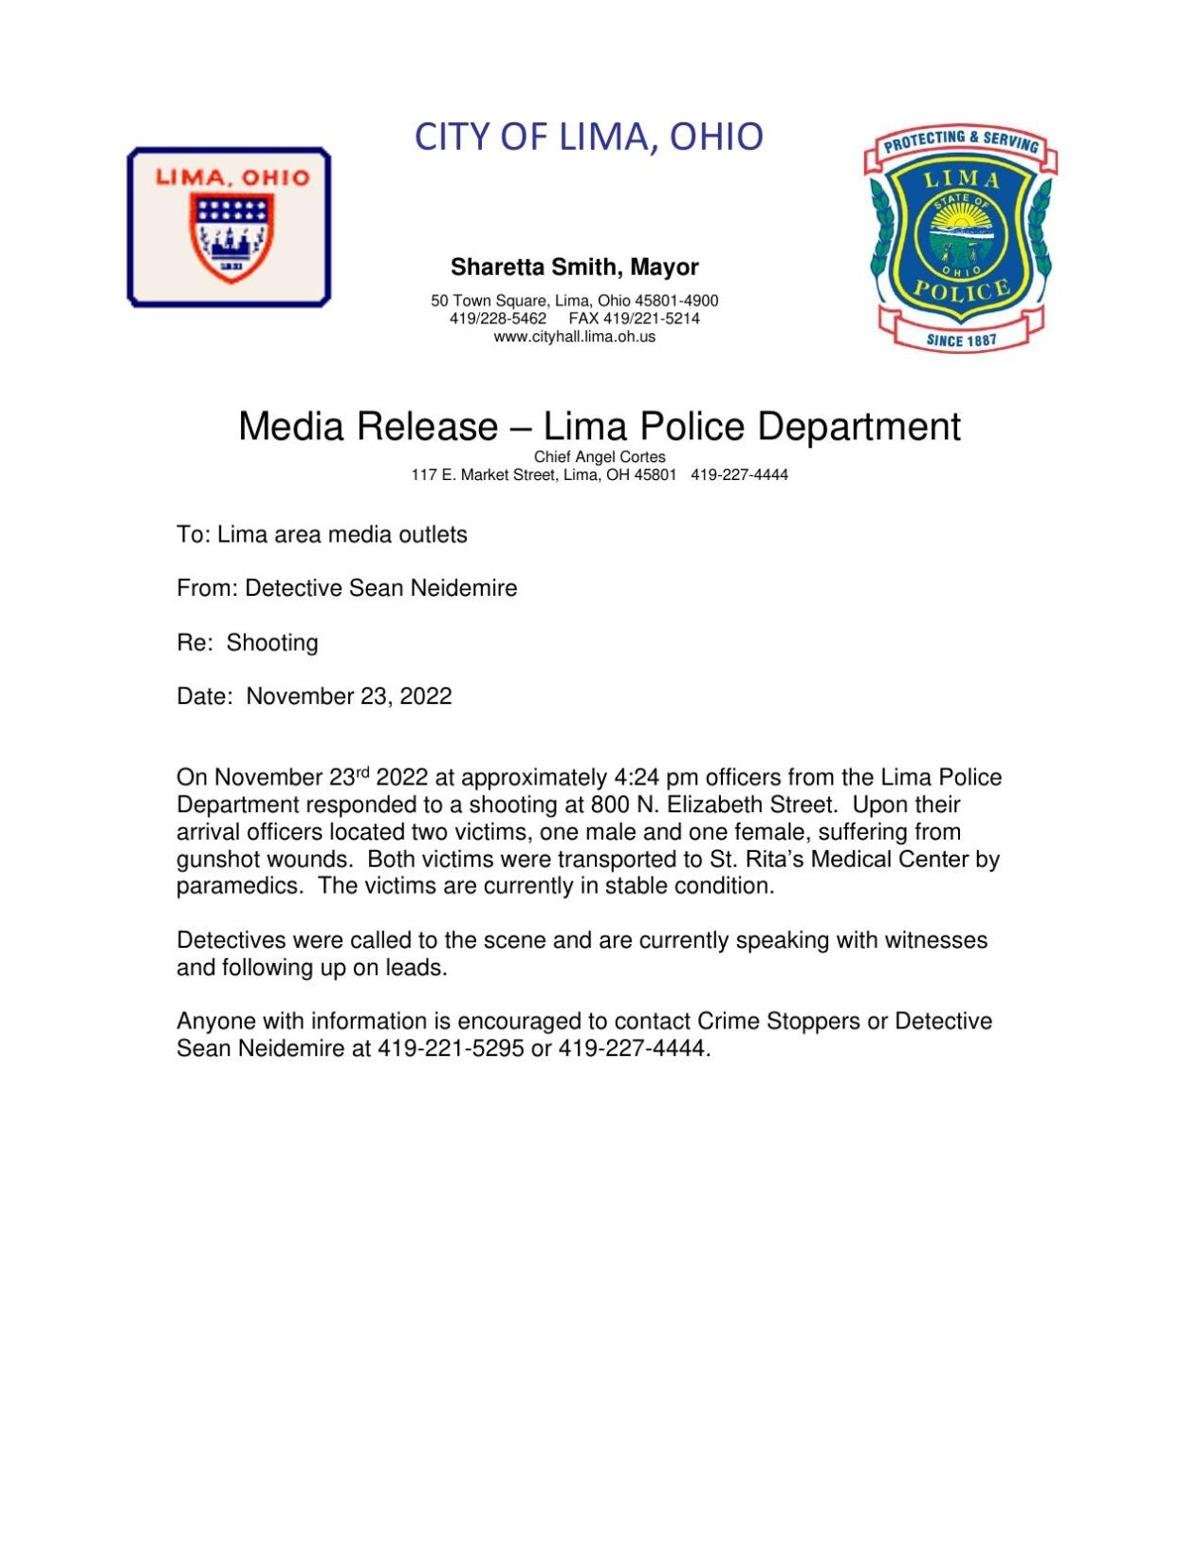 Two shot in Lima Wednesday afternoon, News